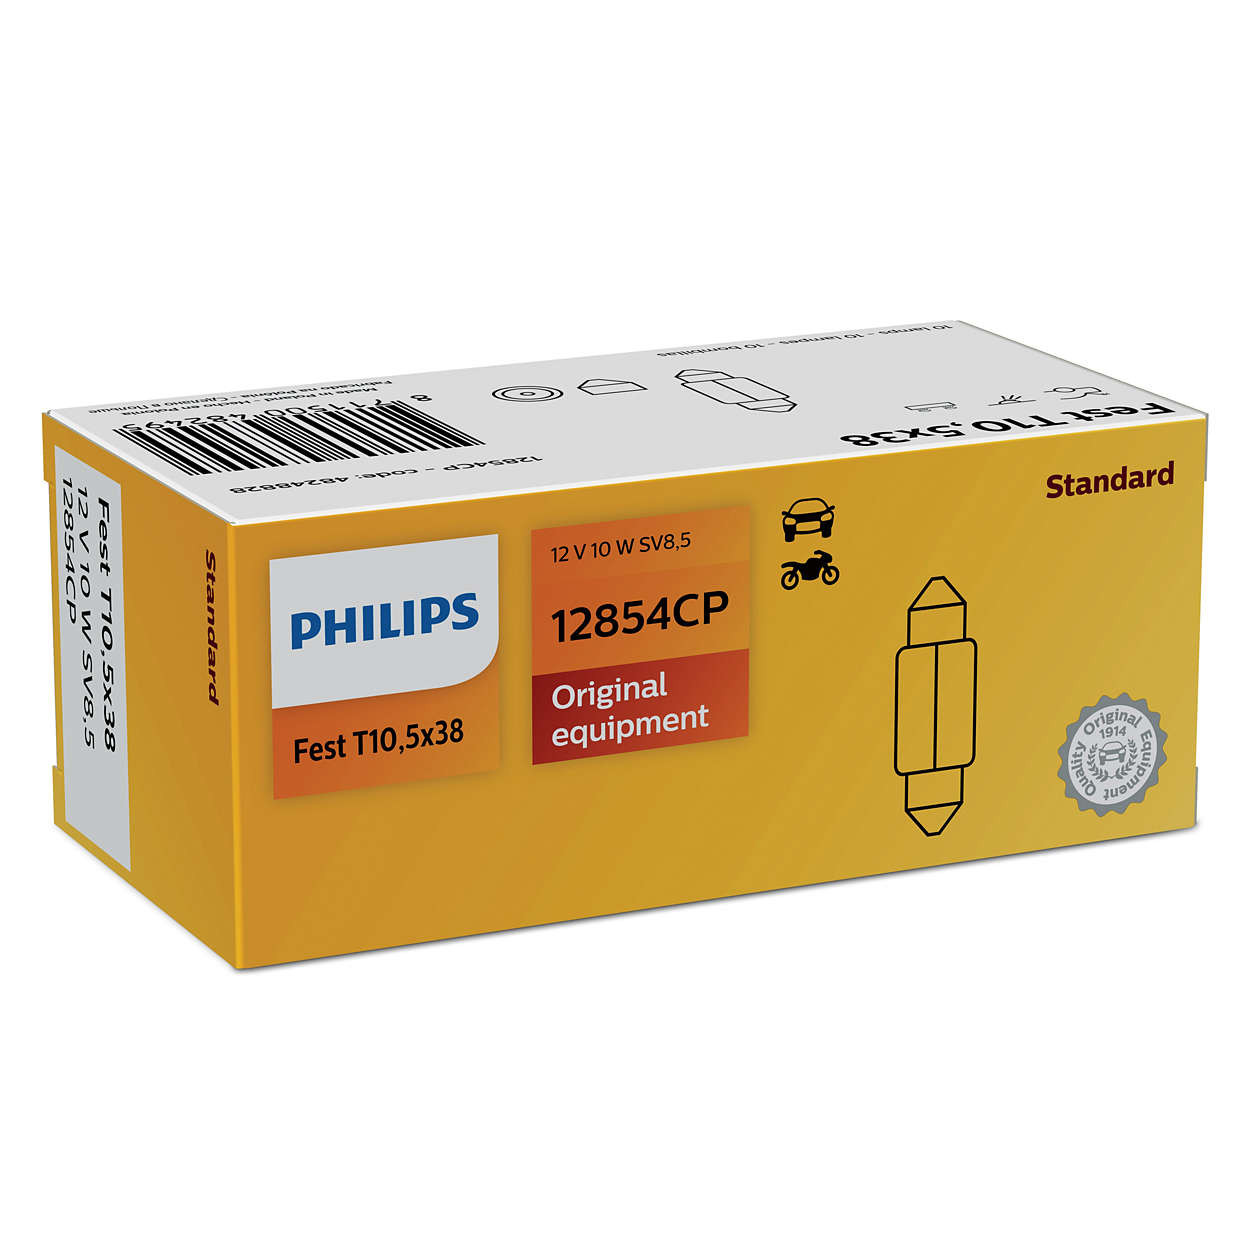 Philips T10.5x38 - 12V - 10W - SV8.5 - buis